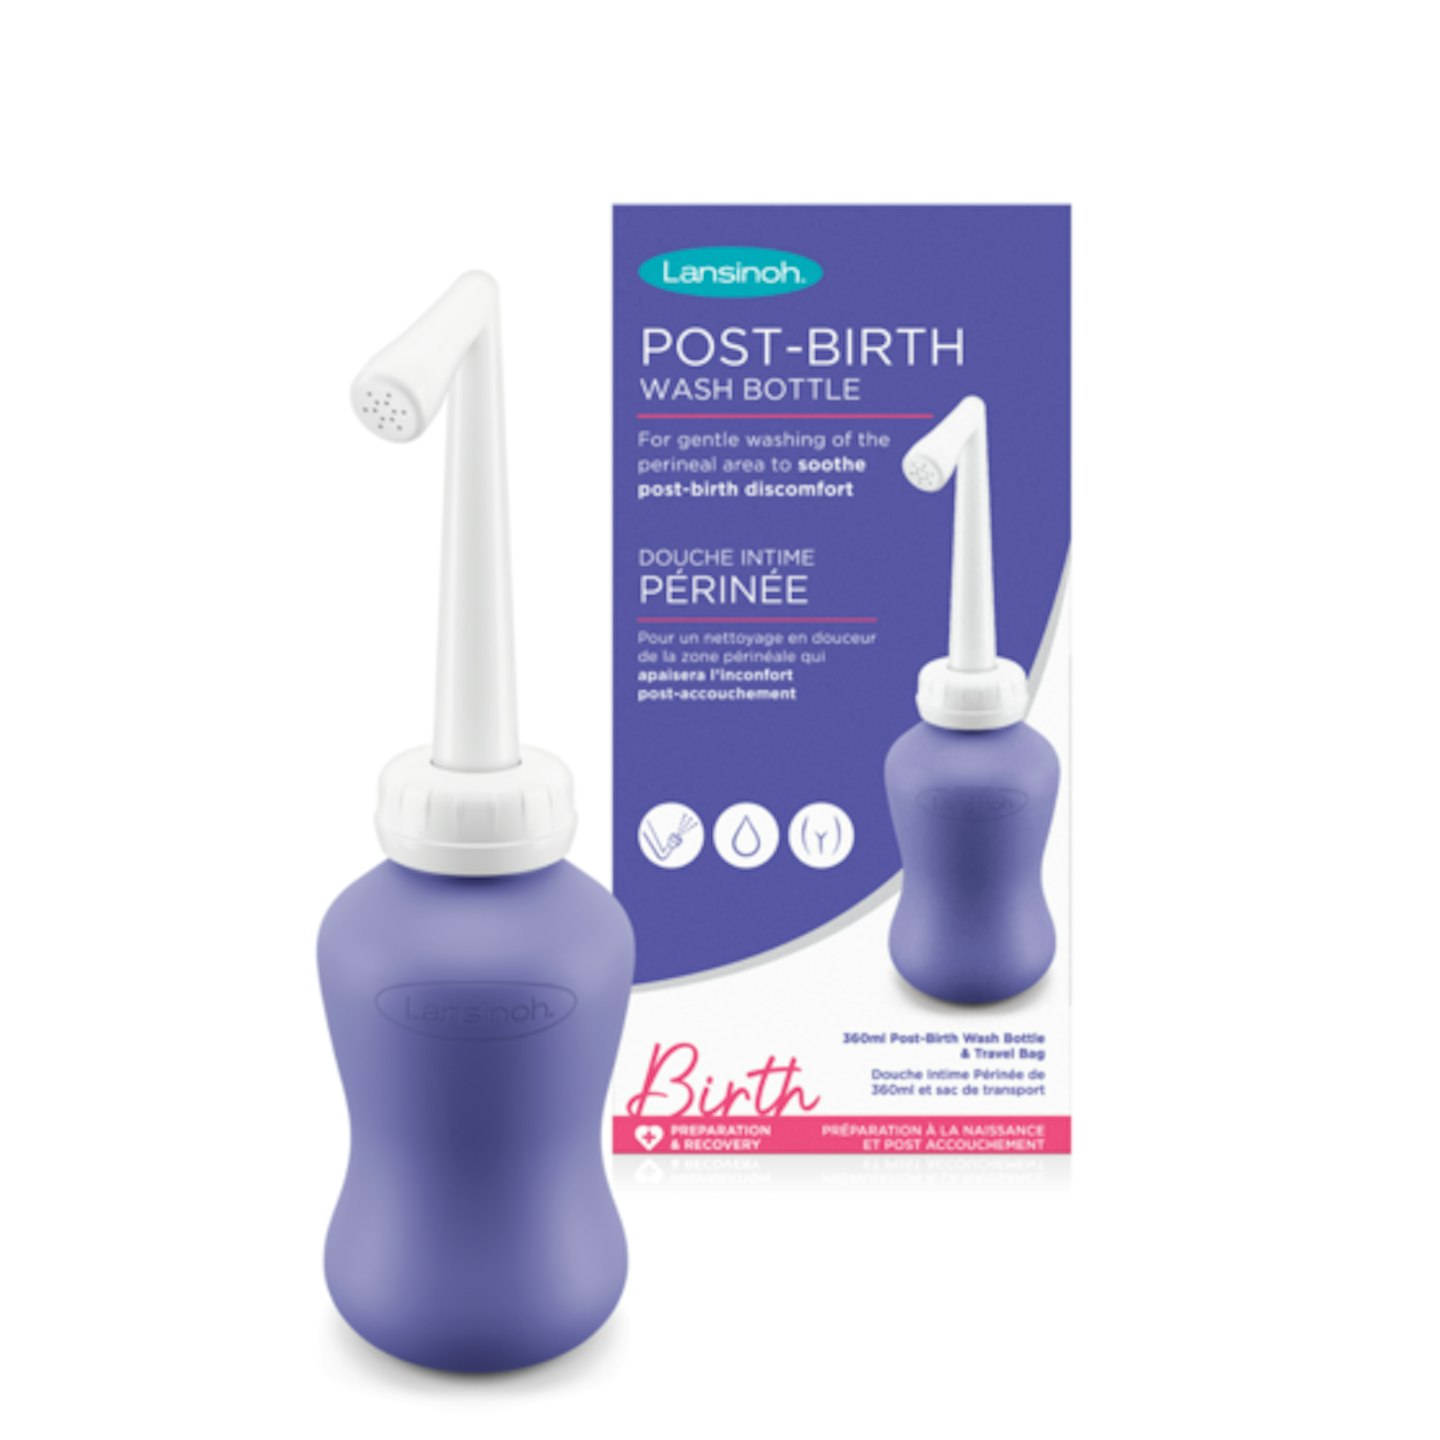 What is a peri bottle and how can it help after giving birth?